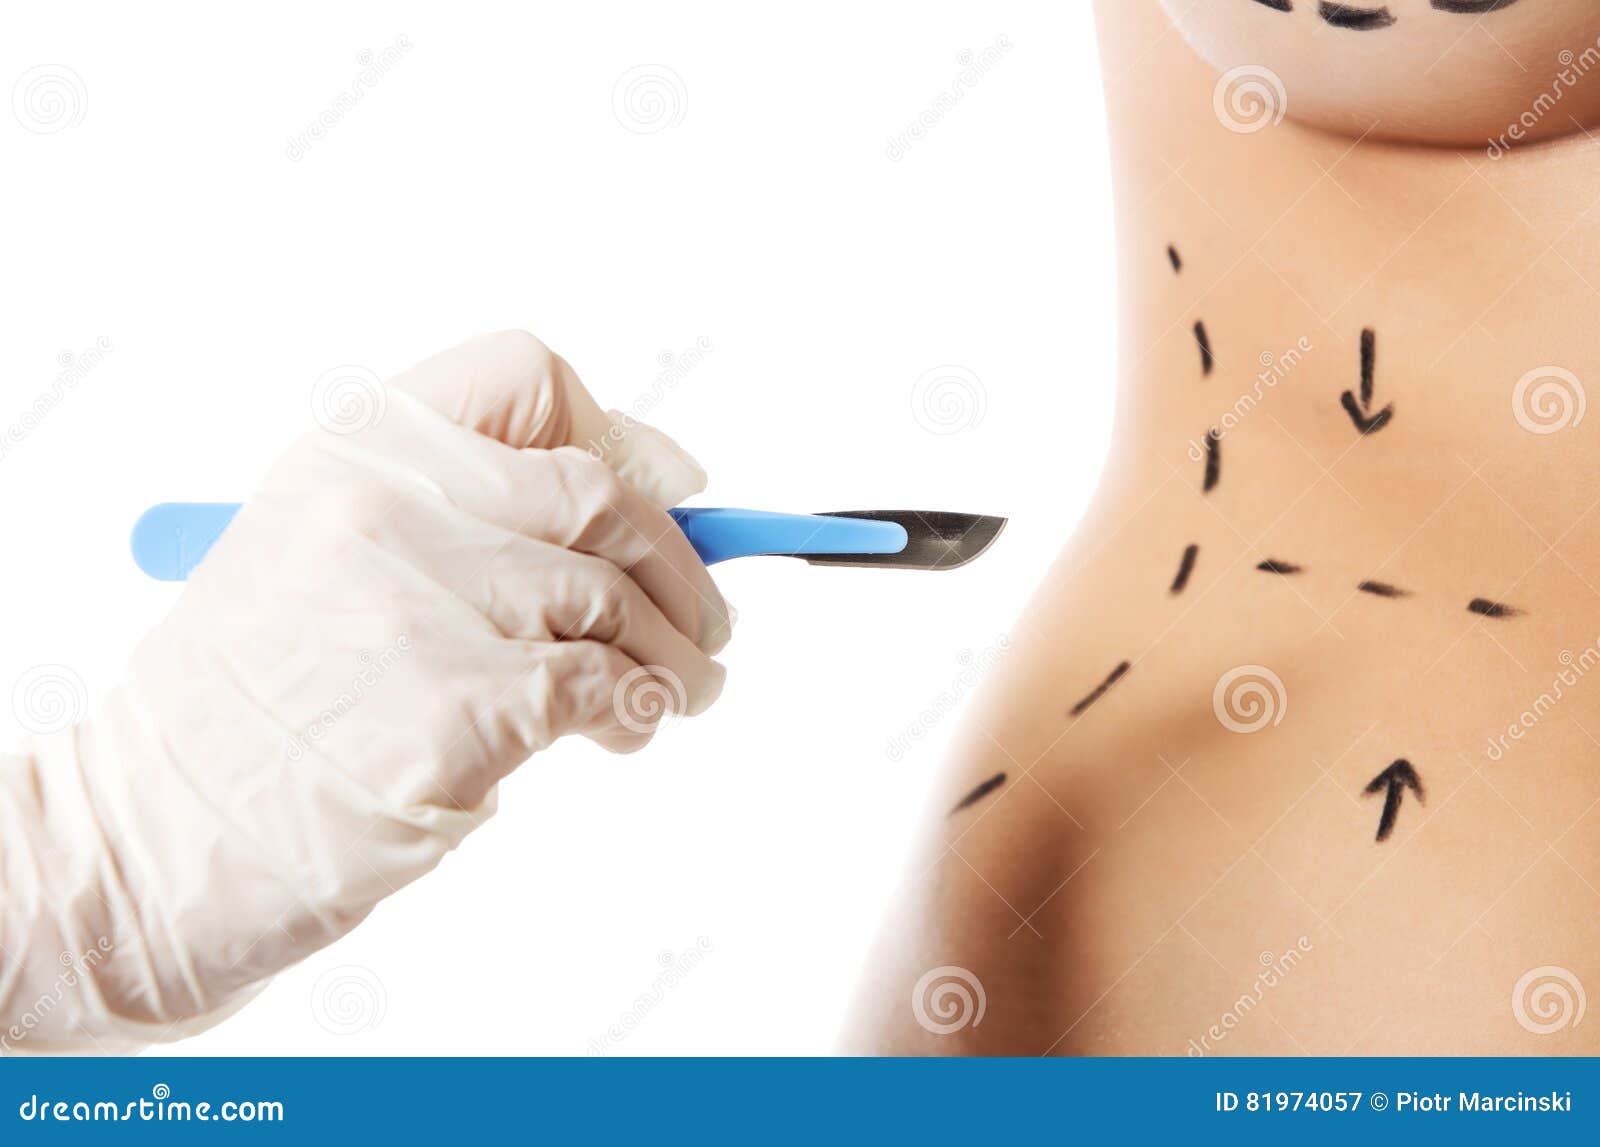 woman body marked out for cosmetic surgery.